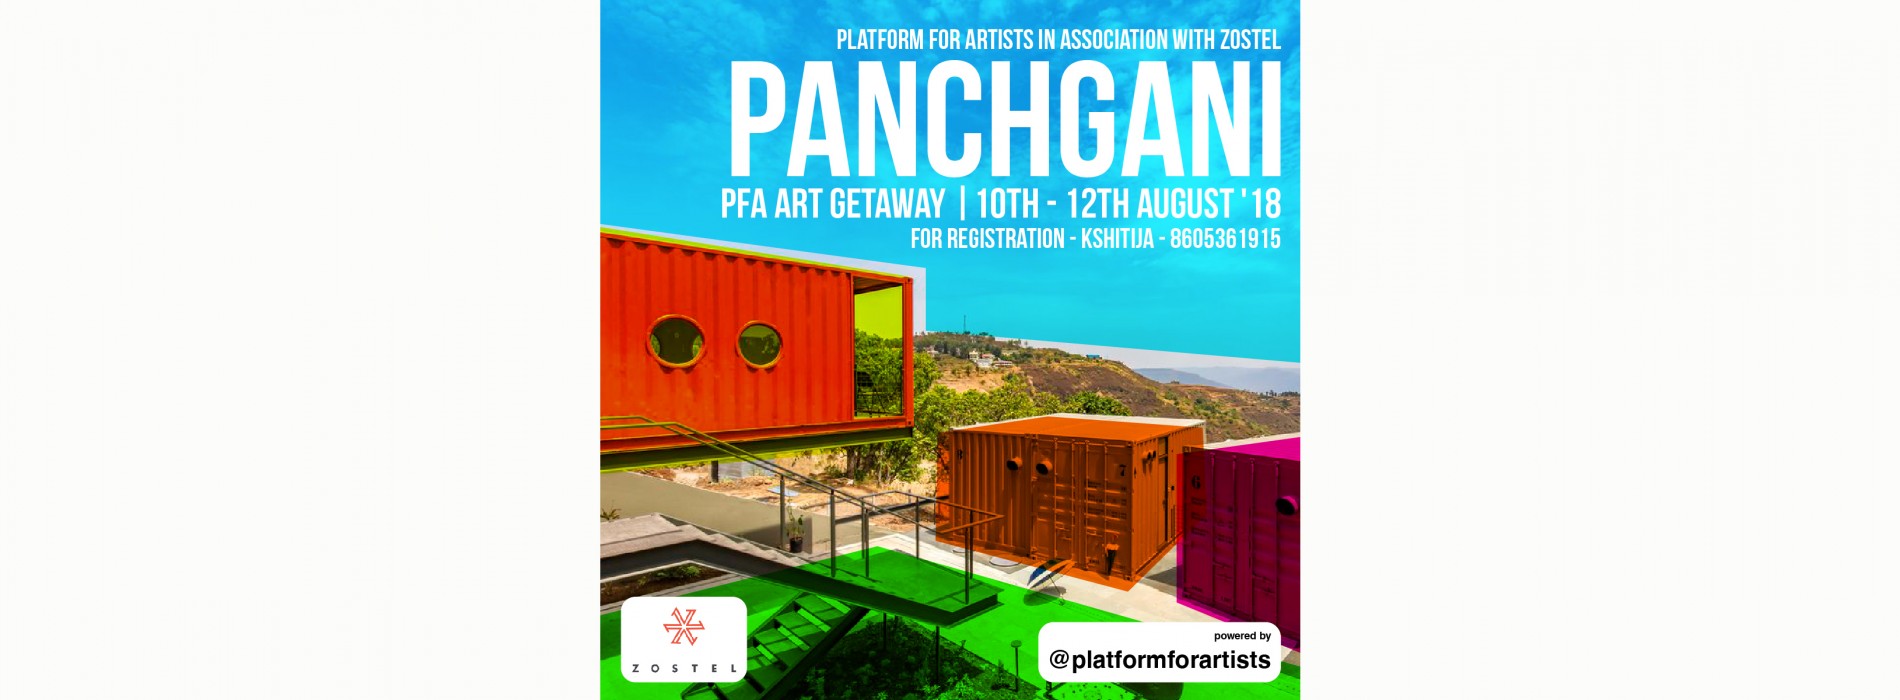 Platform For Artists partners with Zostel for 10th Art Getaway in Panchgani